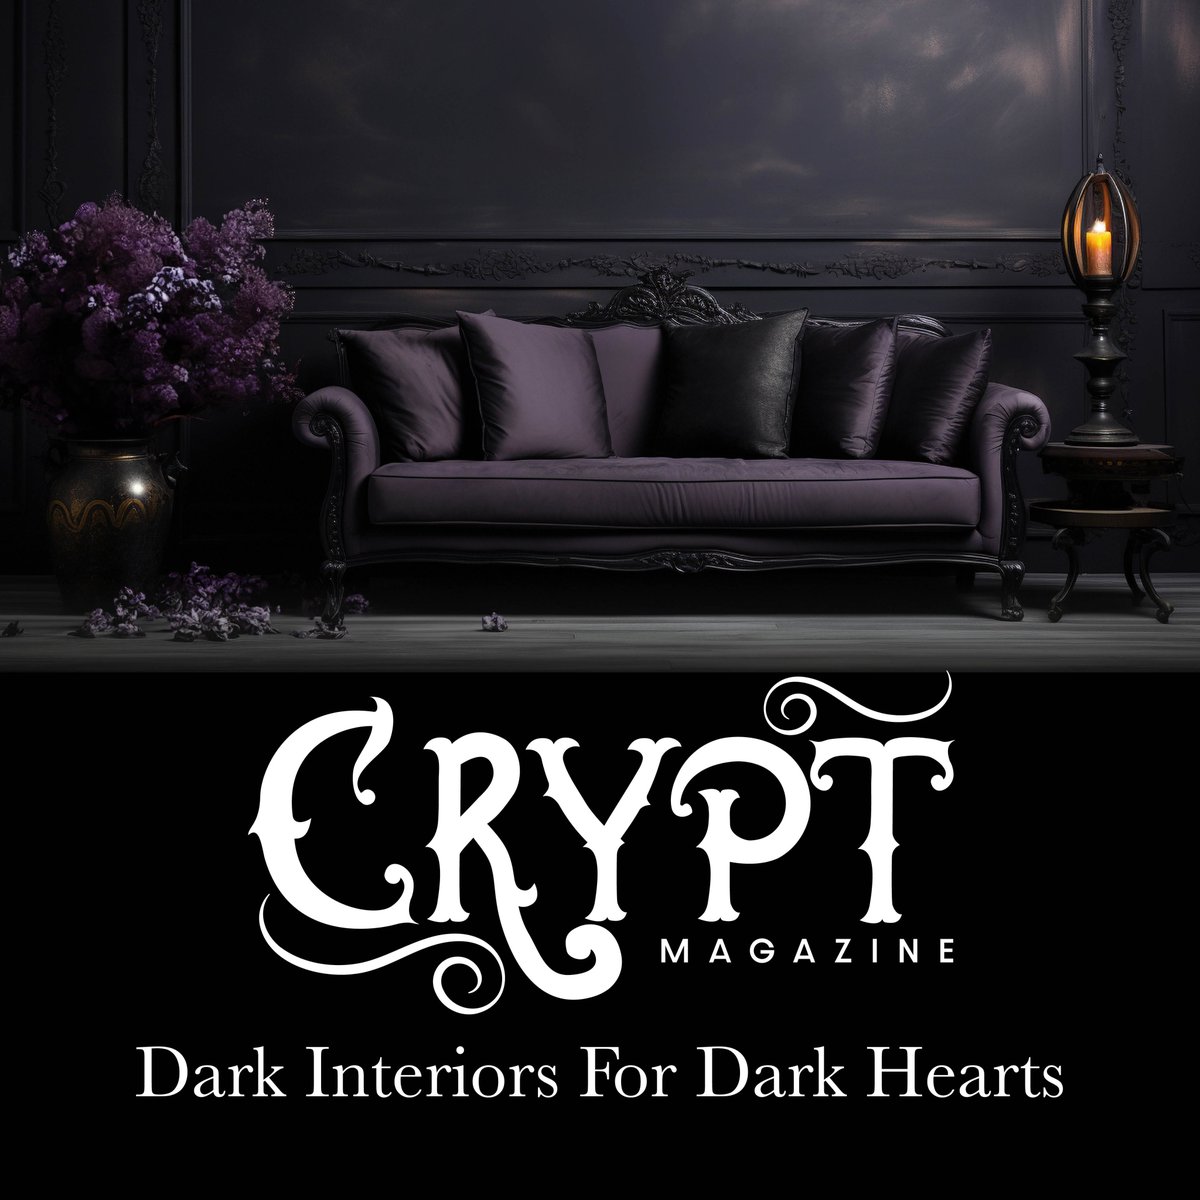 Dark Interiors For Dark Hearts 💜 A digital mag dedicated entirely to alternative interiors & homewares is launching 2024. Being produced by the team at @DevolutionMag who have 20 years experience in independent publishing. Stay Tuned…. #gothichome #althome #gothdecor